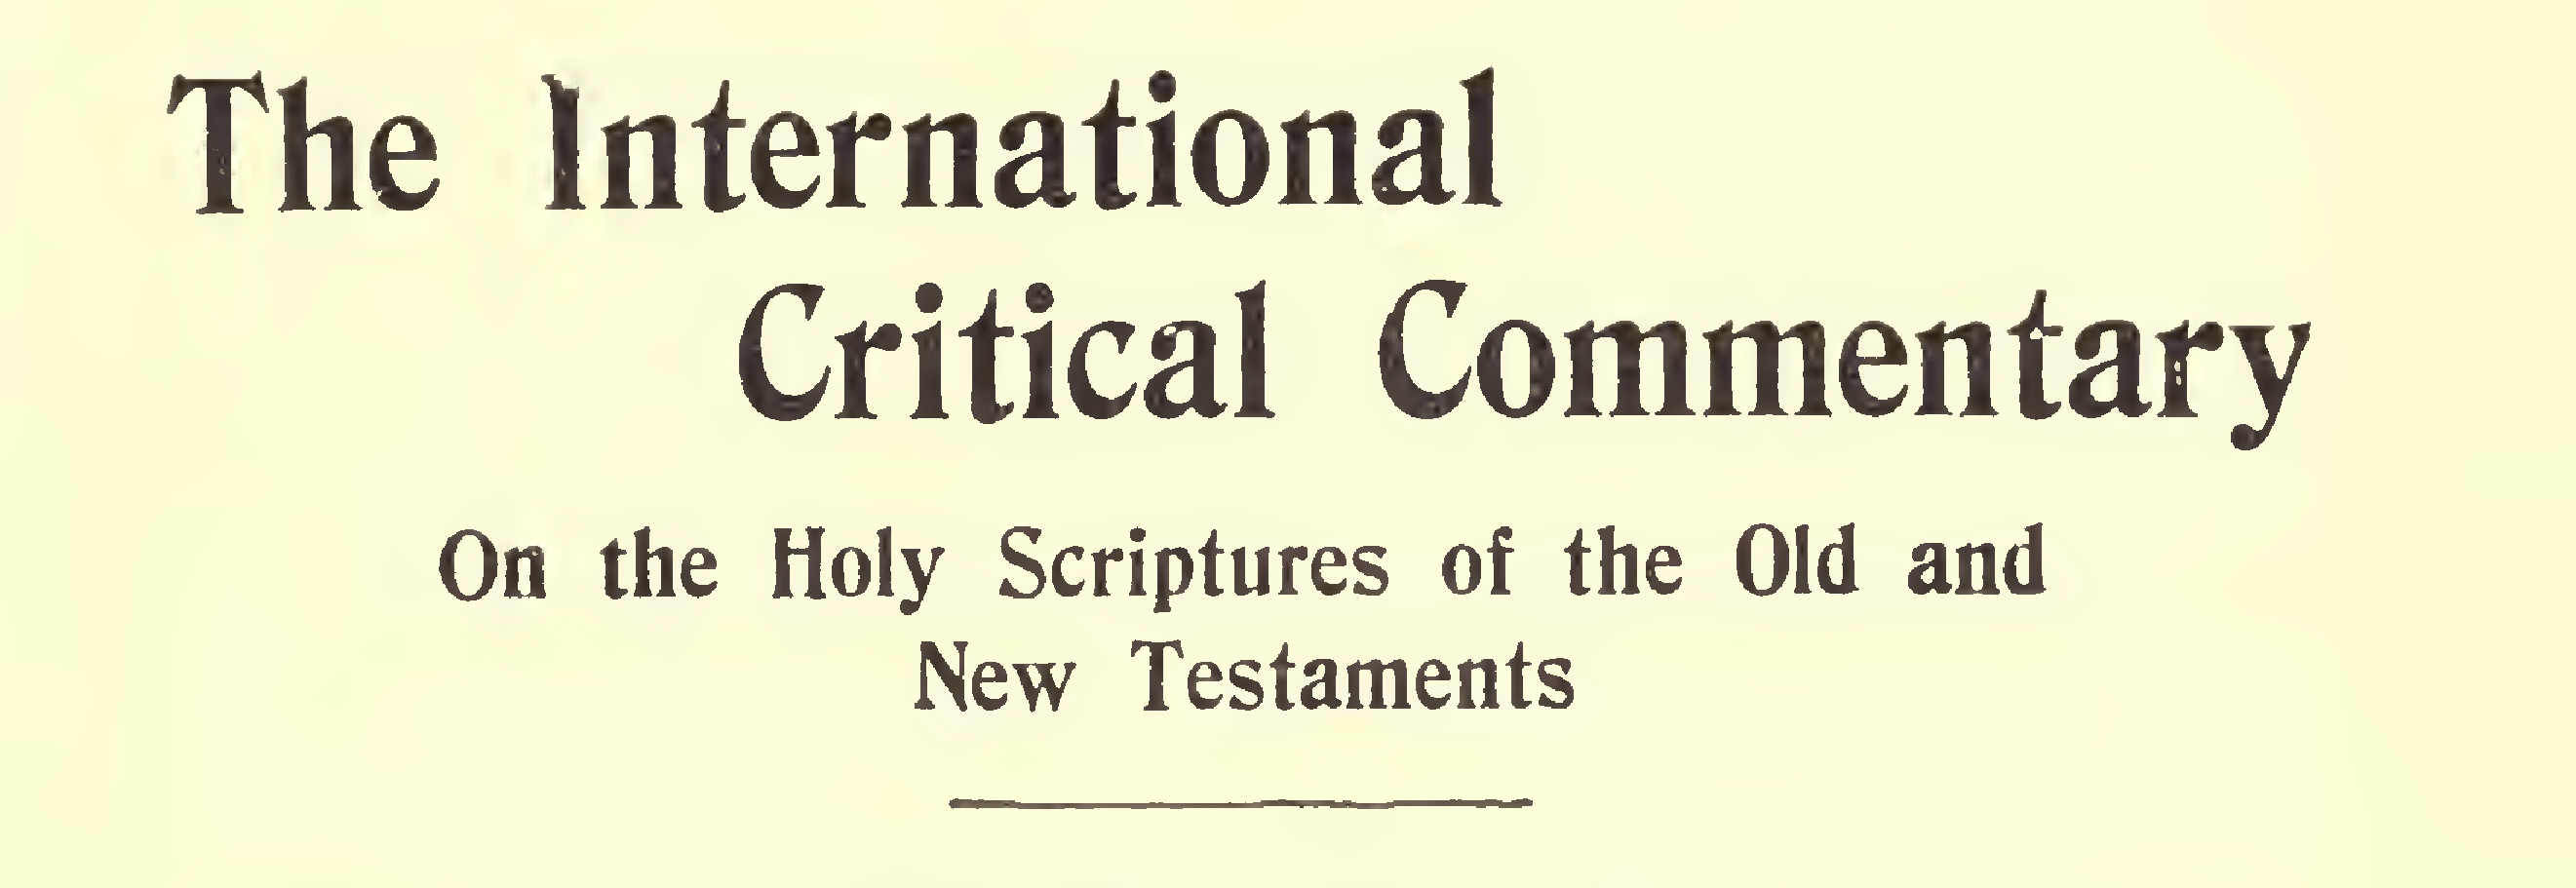 Free Access to the International Critical Commentary | J. David Stark